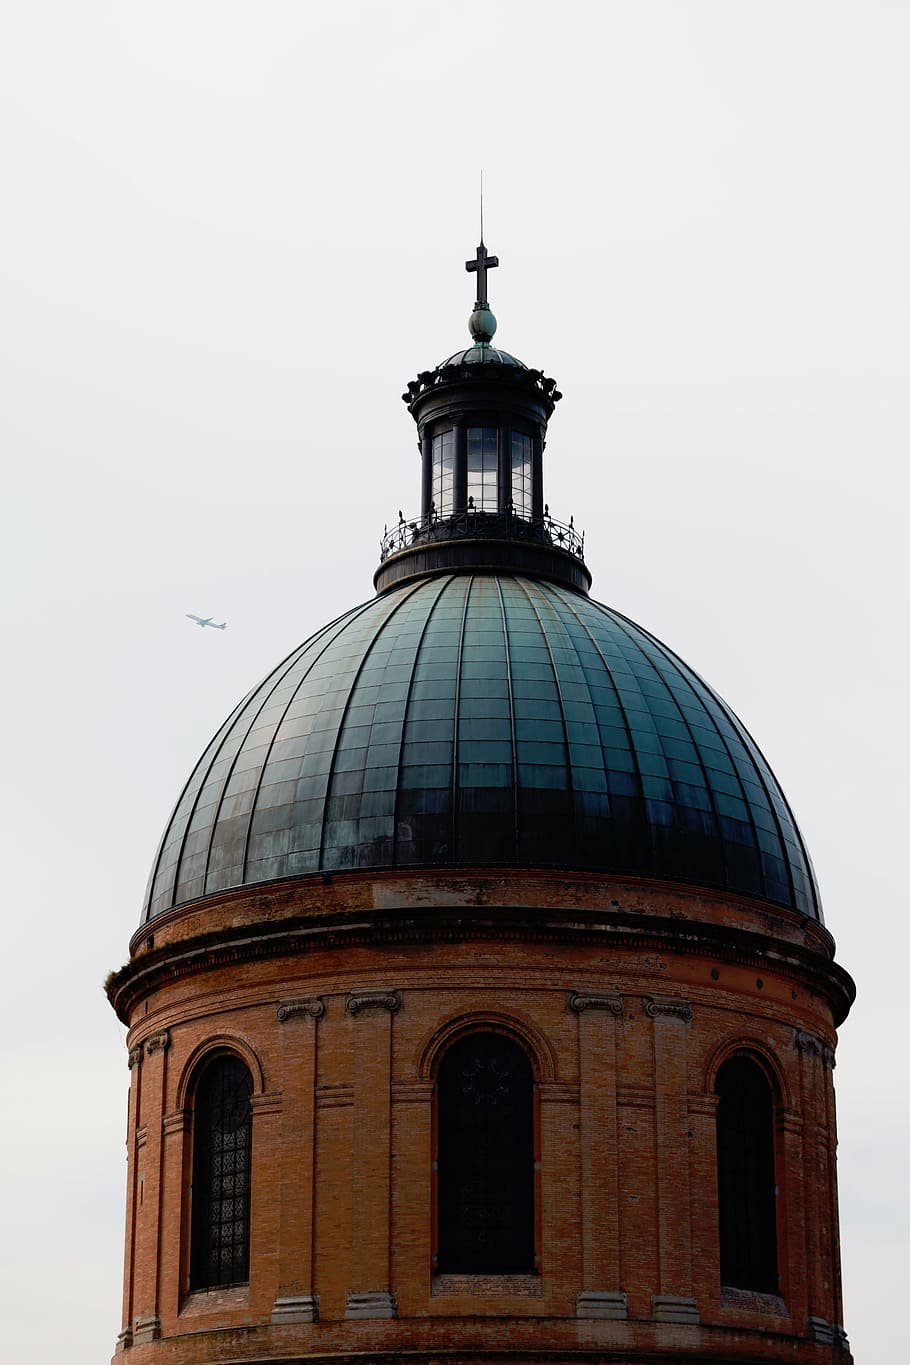 glass dome tower, buildings, structure, architecture, design, landmark, cross, church, dome, cathedral